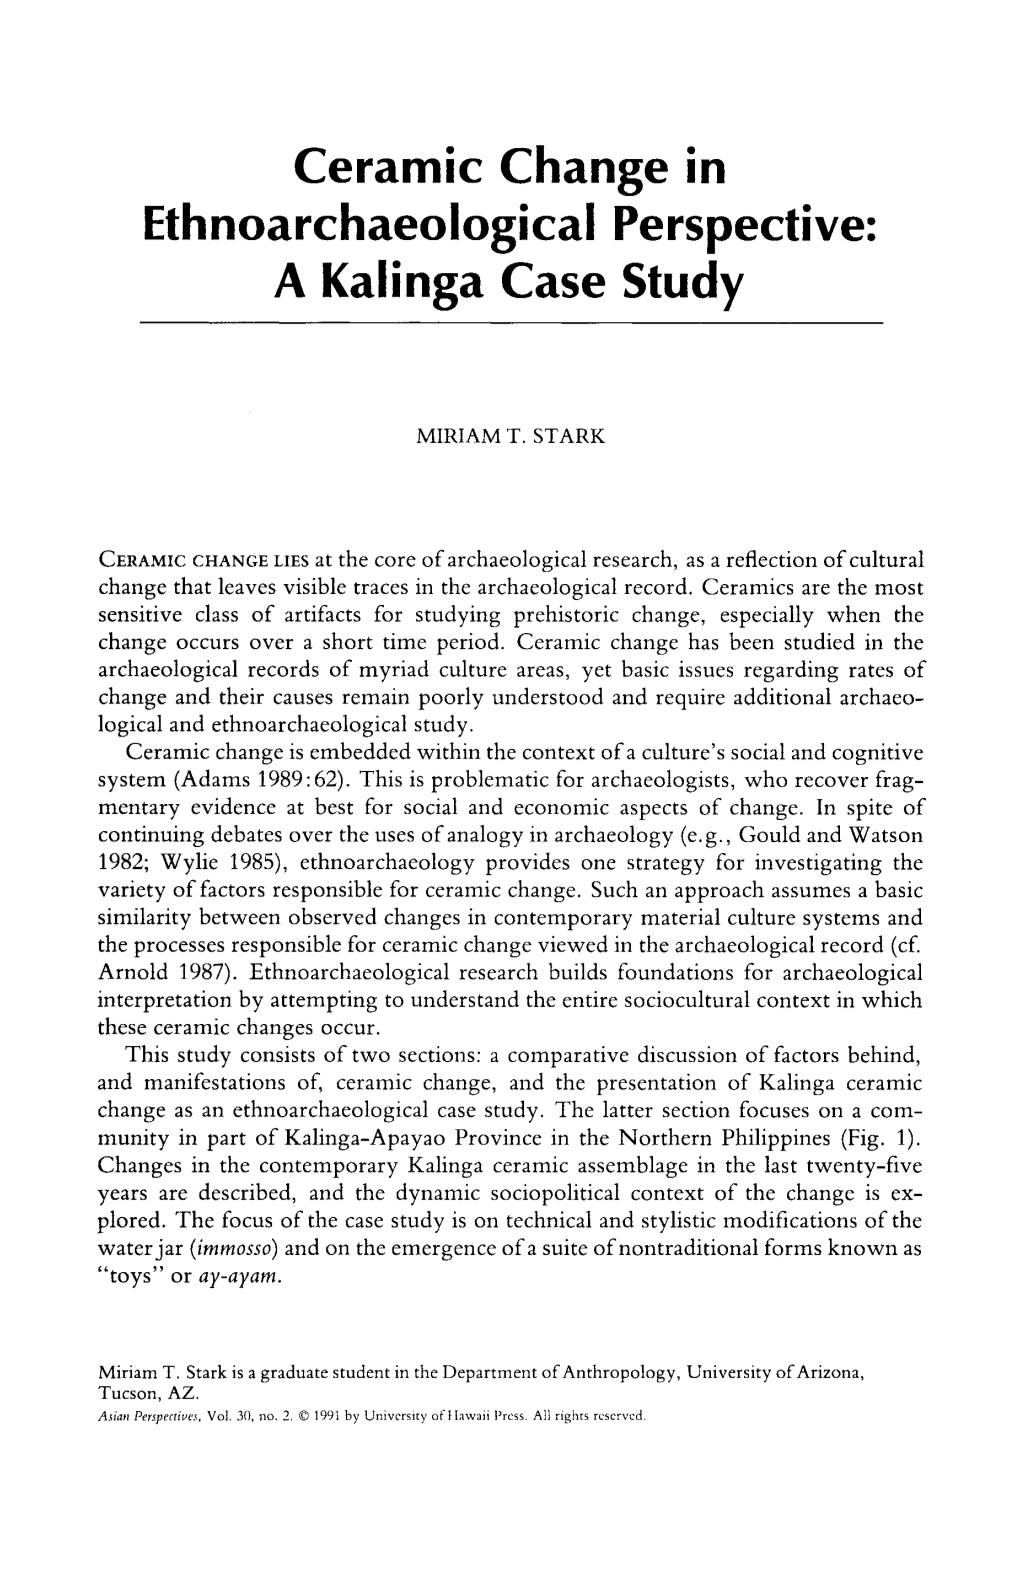 Ceramic Change in Ethnoarchaeological Perspective: a Kalinga Case Study